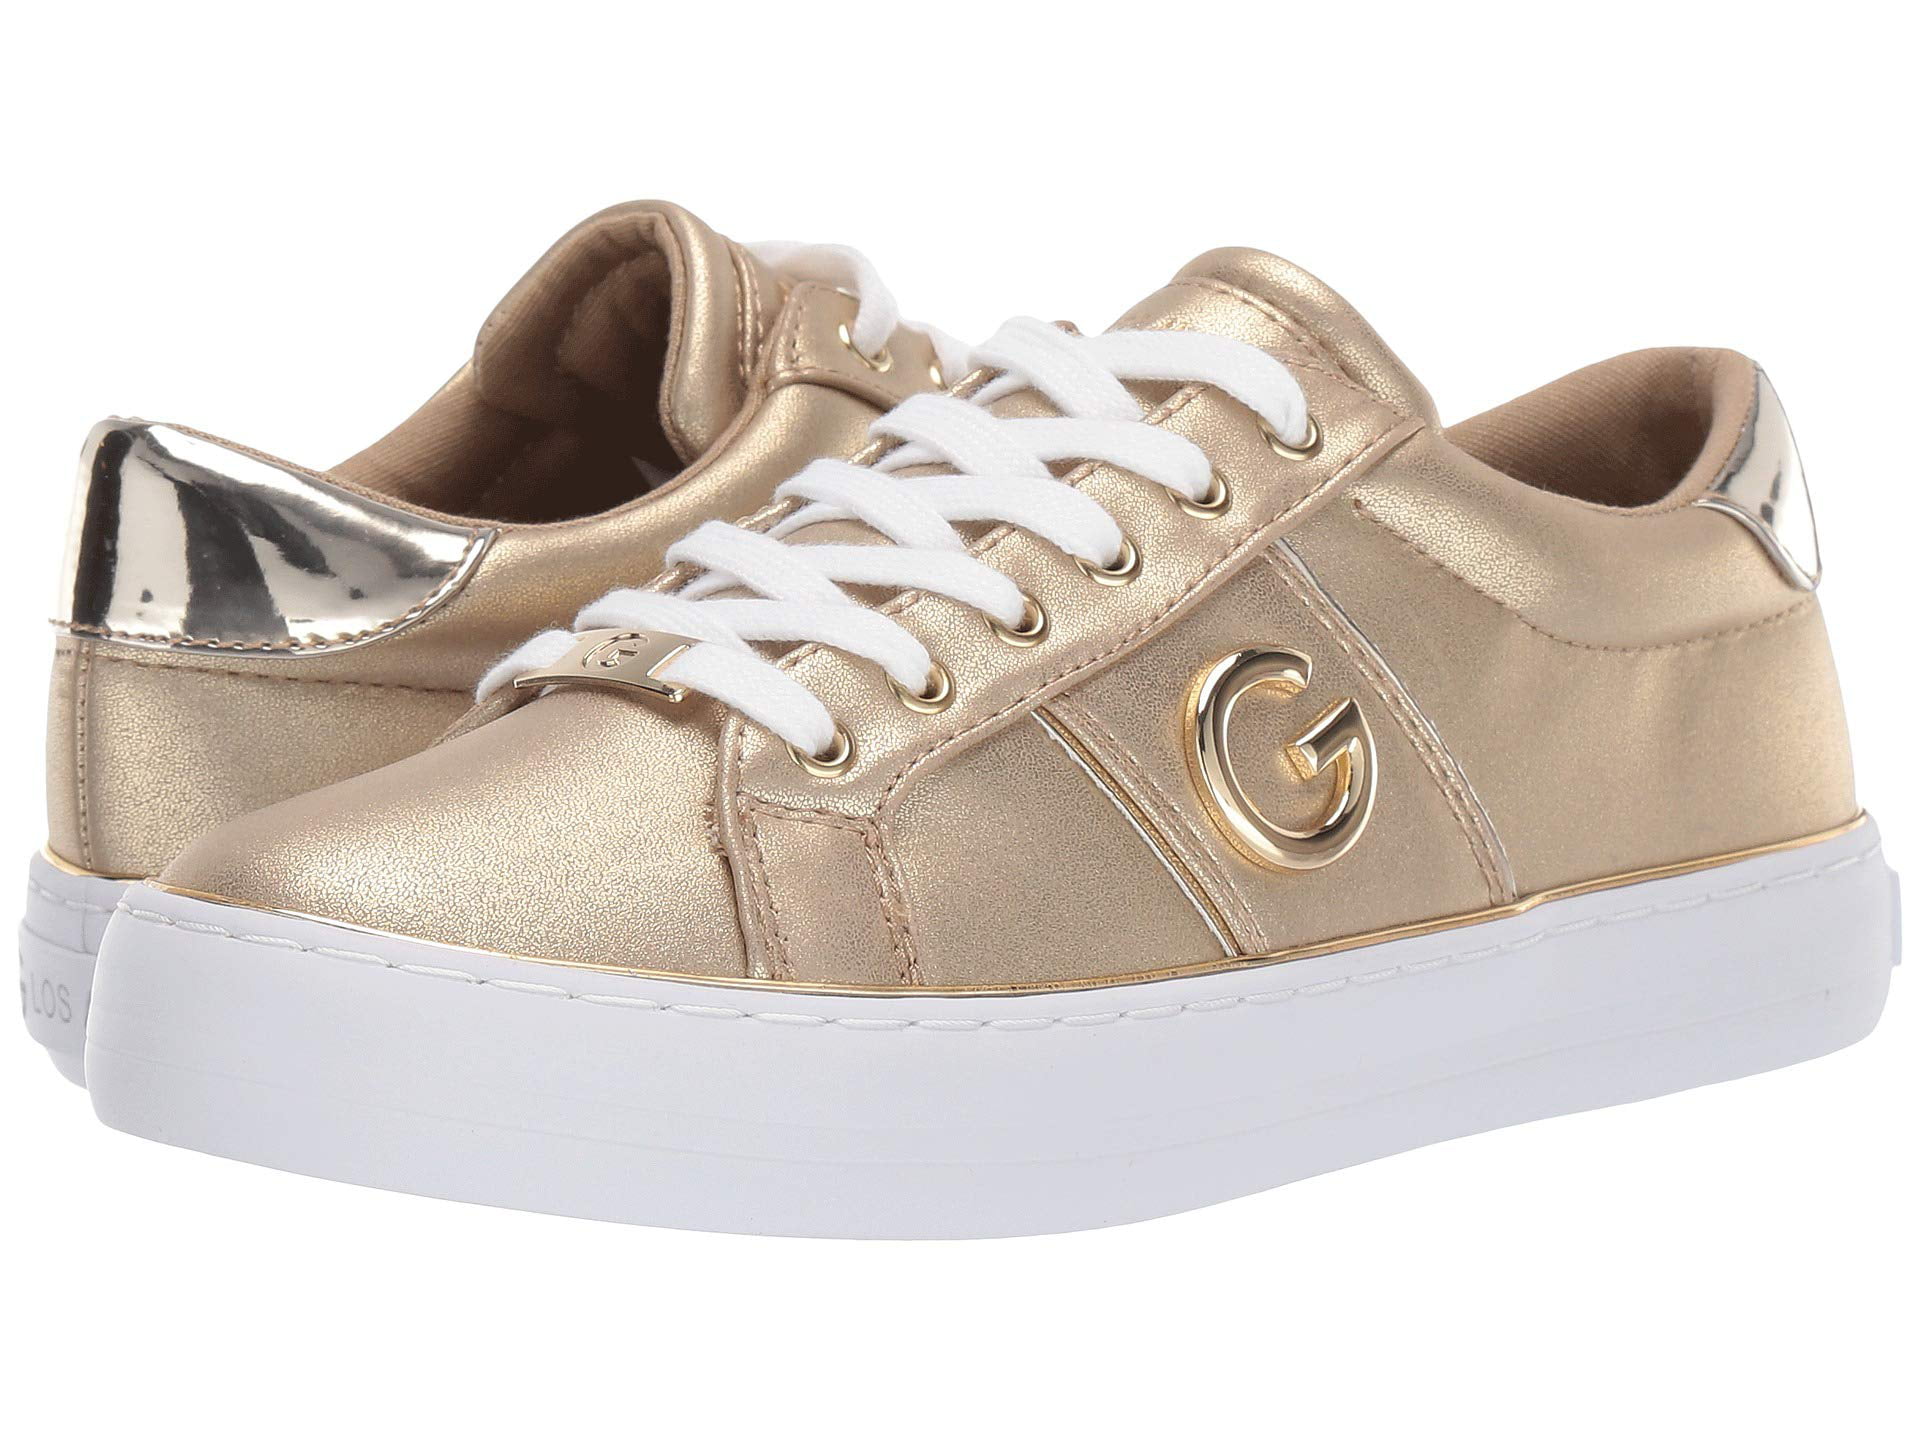 Buy > gbg los angeles shoes > in stock